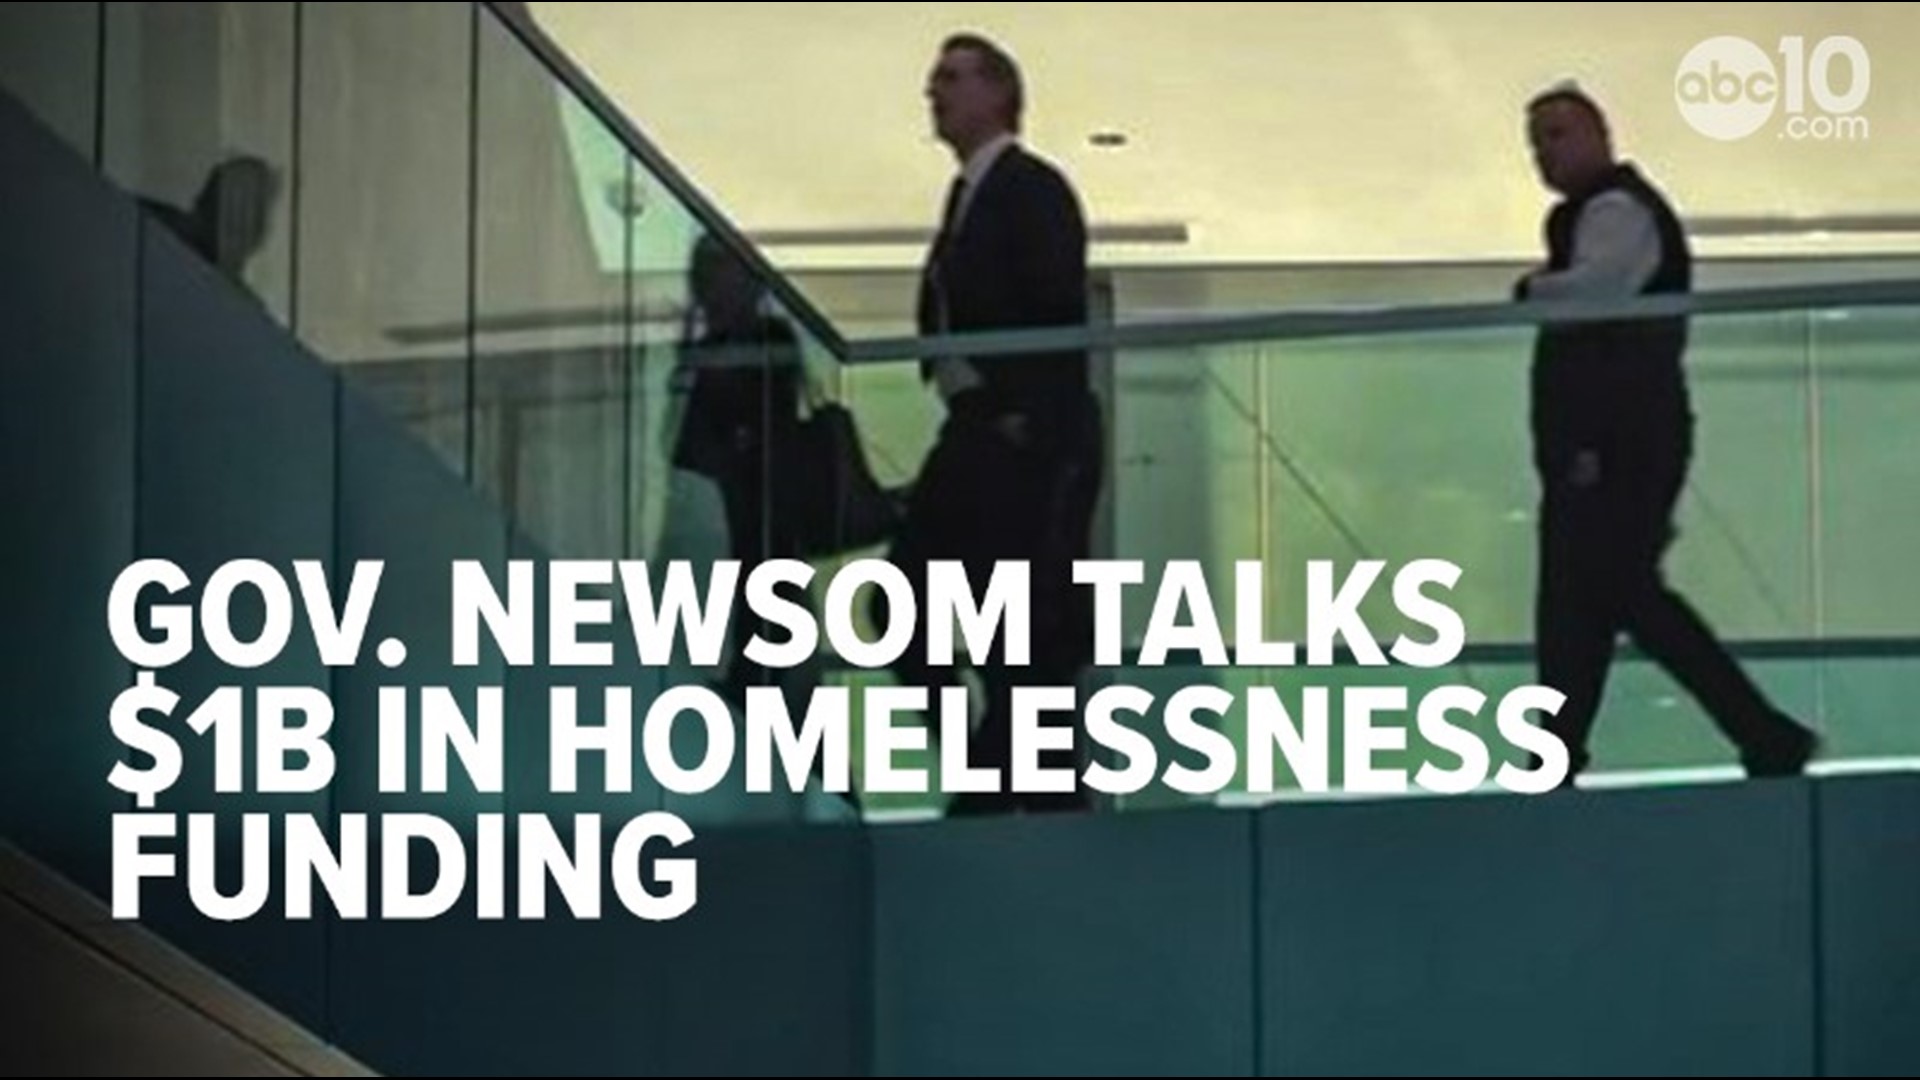 California mayors say Gov. Newsom's recent decision to withhold $1 billion in homelessness prevention funds was not necessary to get a discussion started.